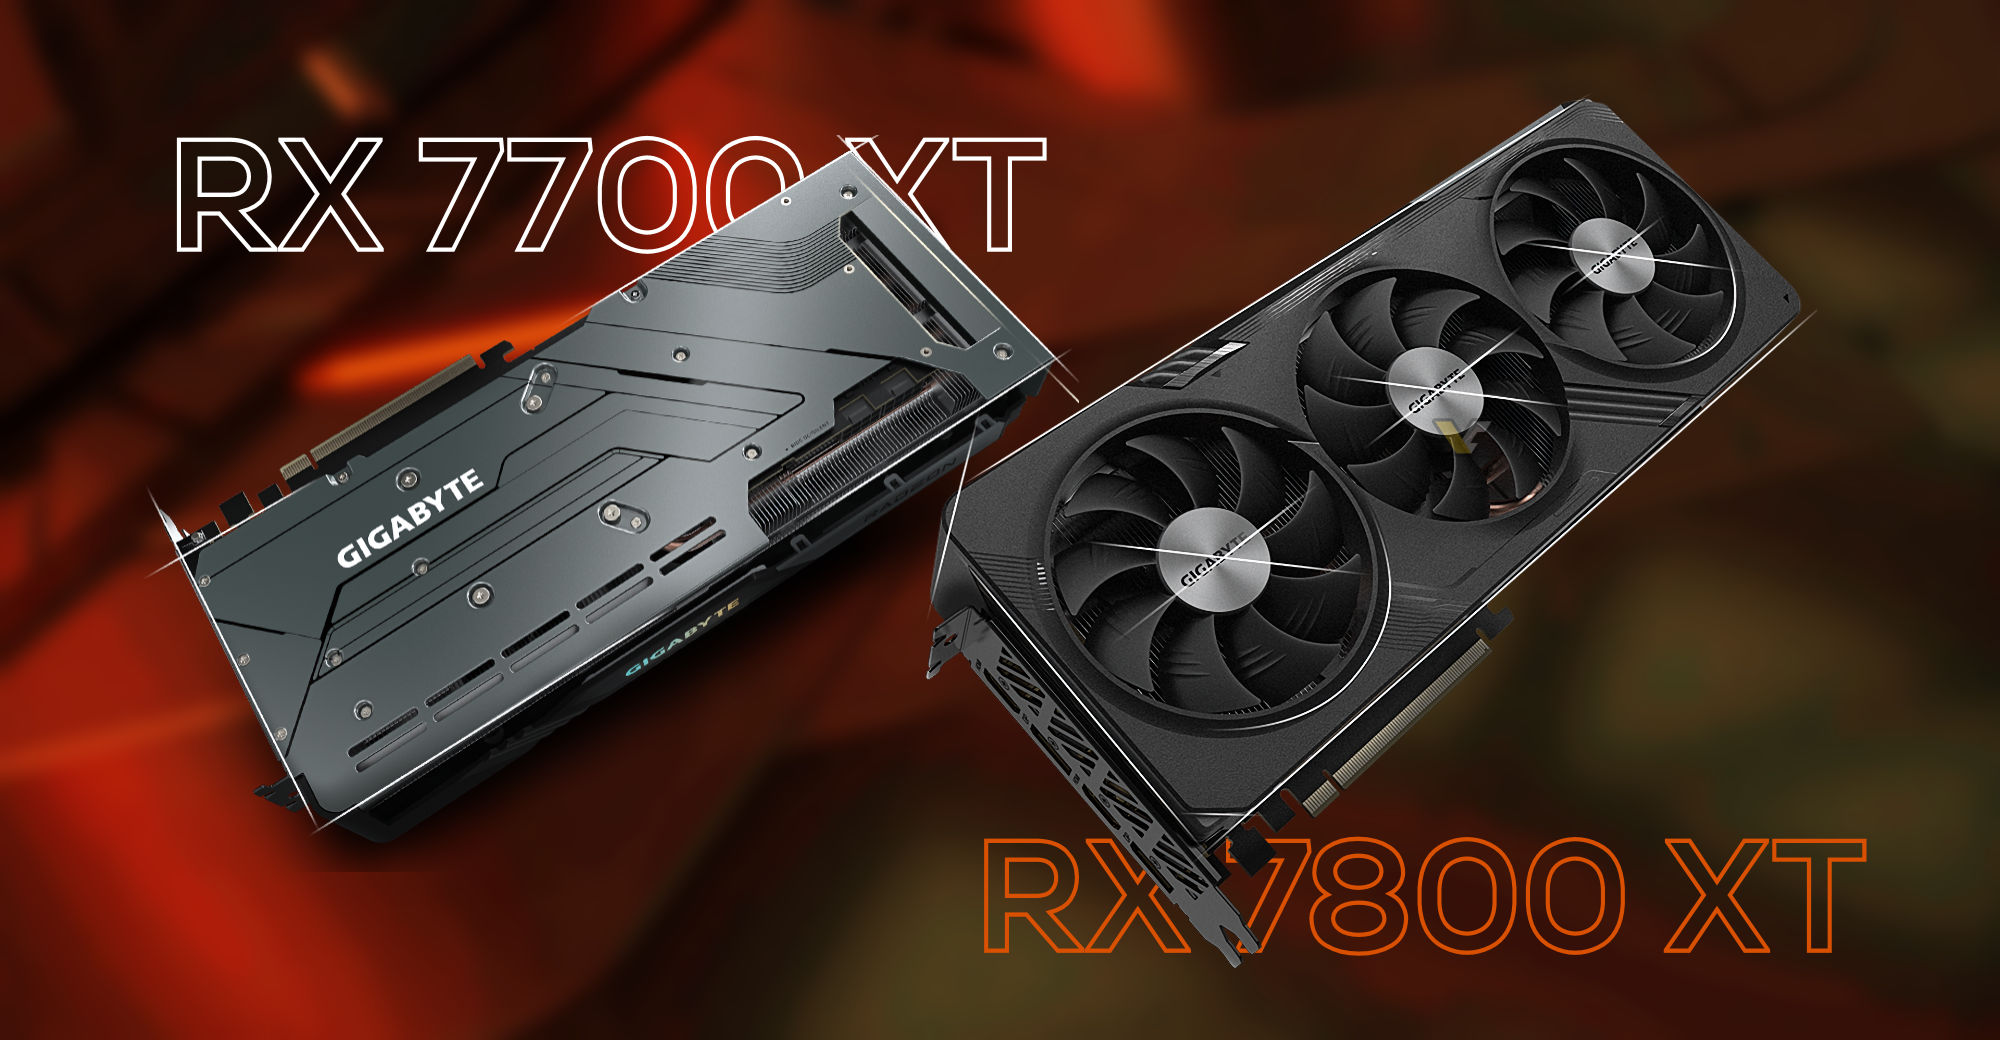 Gigabyte launches AMD Radeon RX 7800 XT and RX 7700 XT Gaming GPUs 